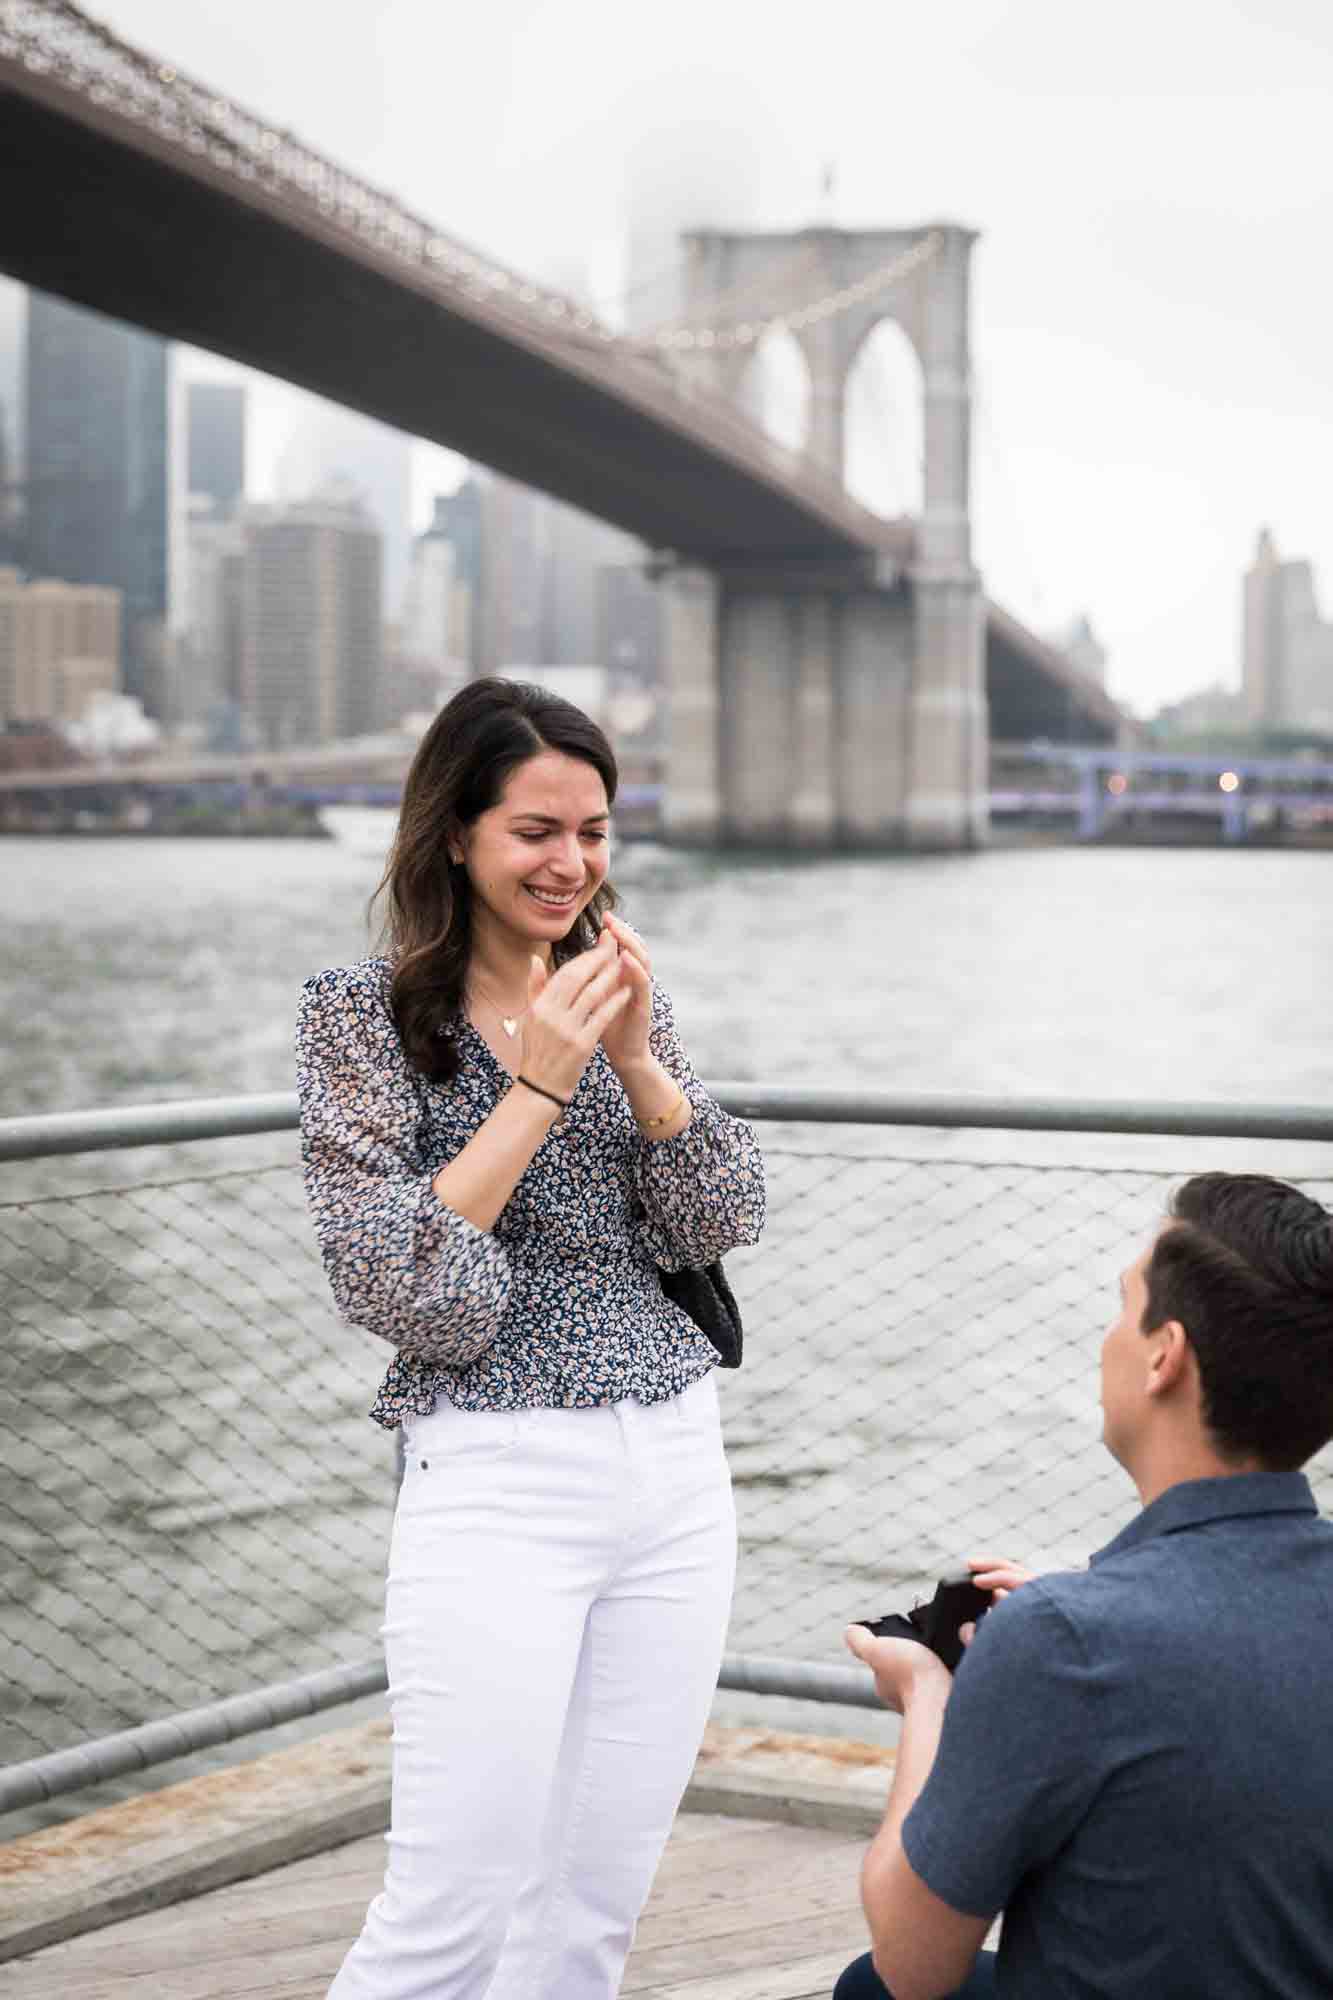 Woman looking shocked standing in front of man holding engagement ring box for an article on Brooklyn Bridge Park rainy day photo locations